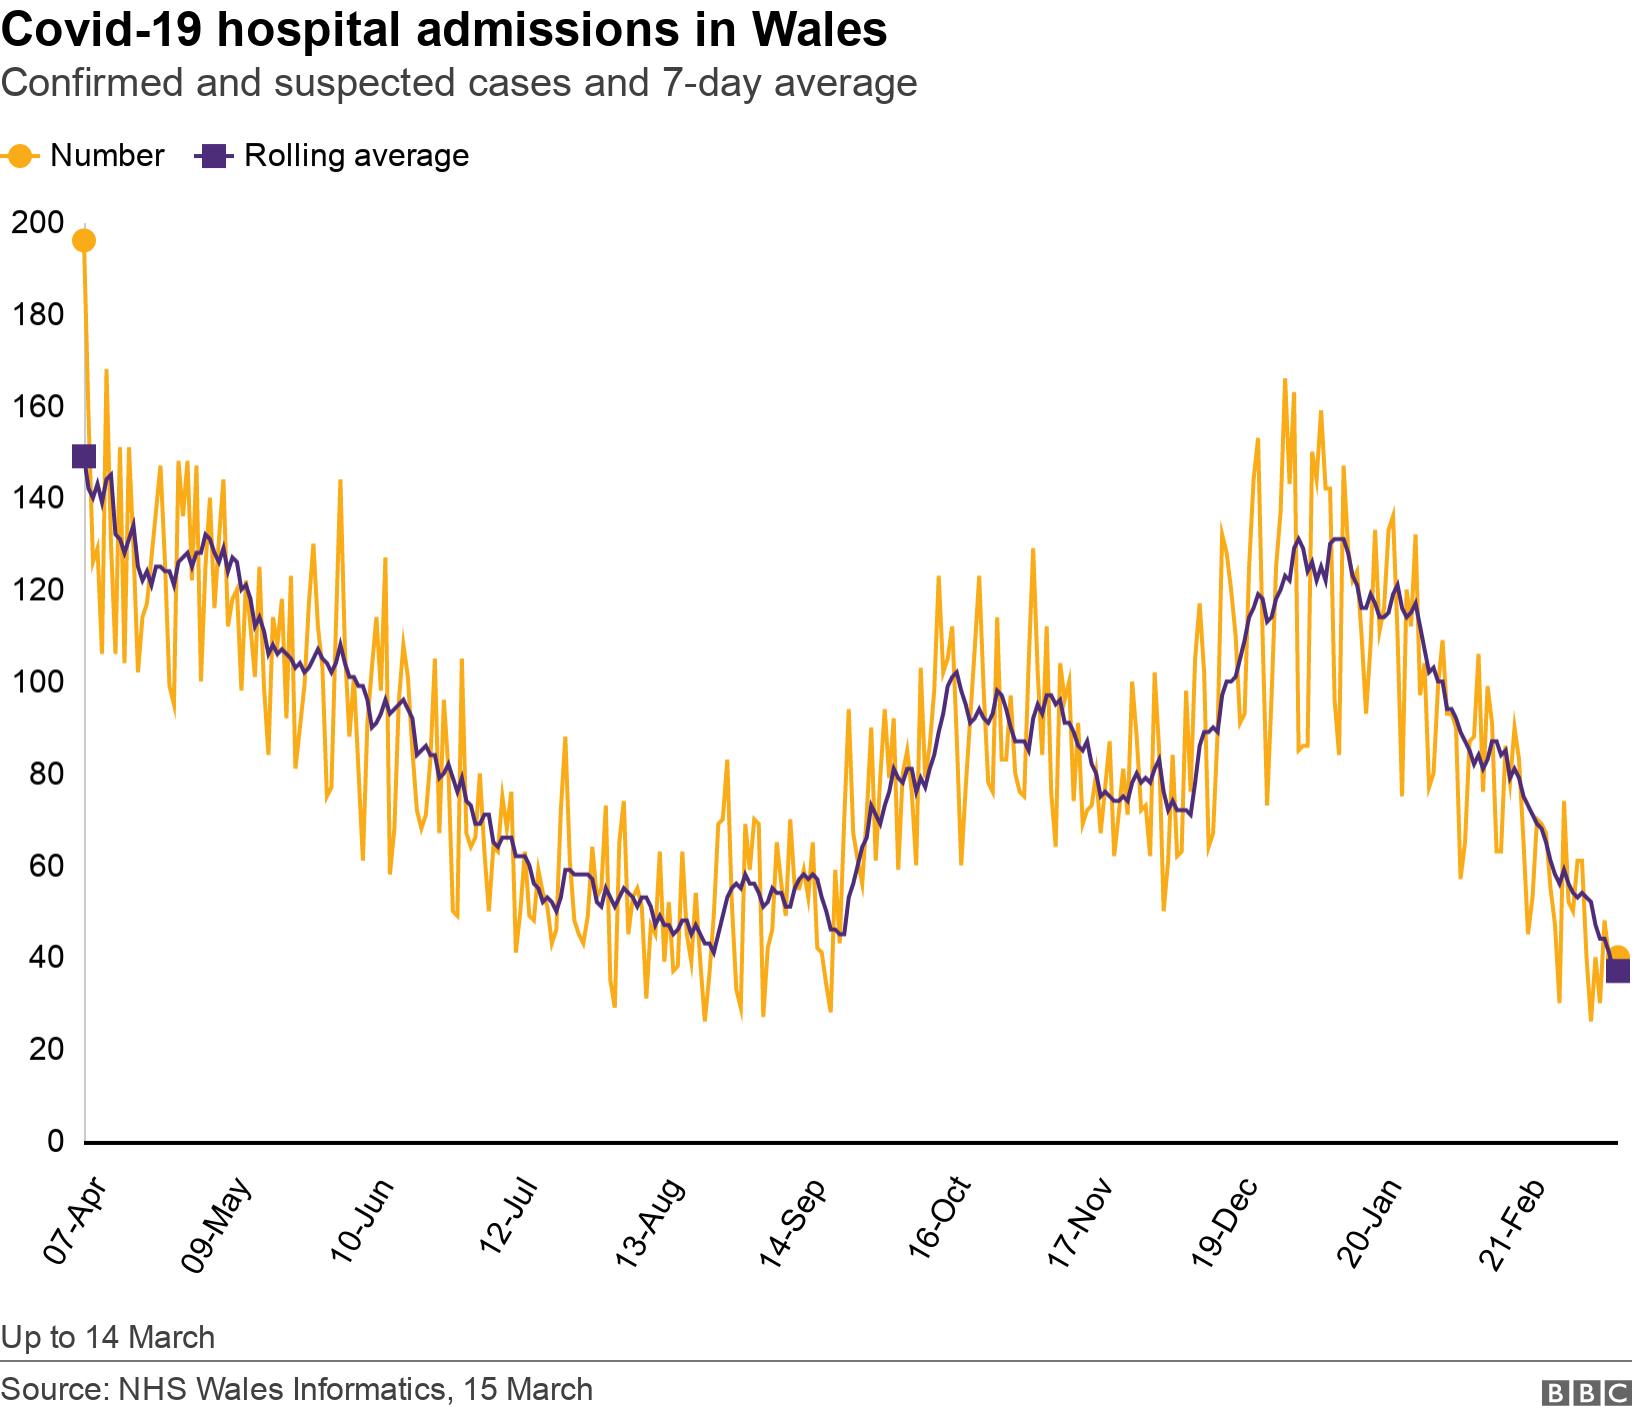 Covid-19 hospital admissions in Wales. Confirmed and suspected cases and 7-day average.  Up to 14 March.